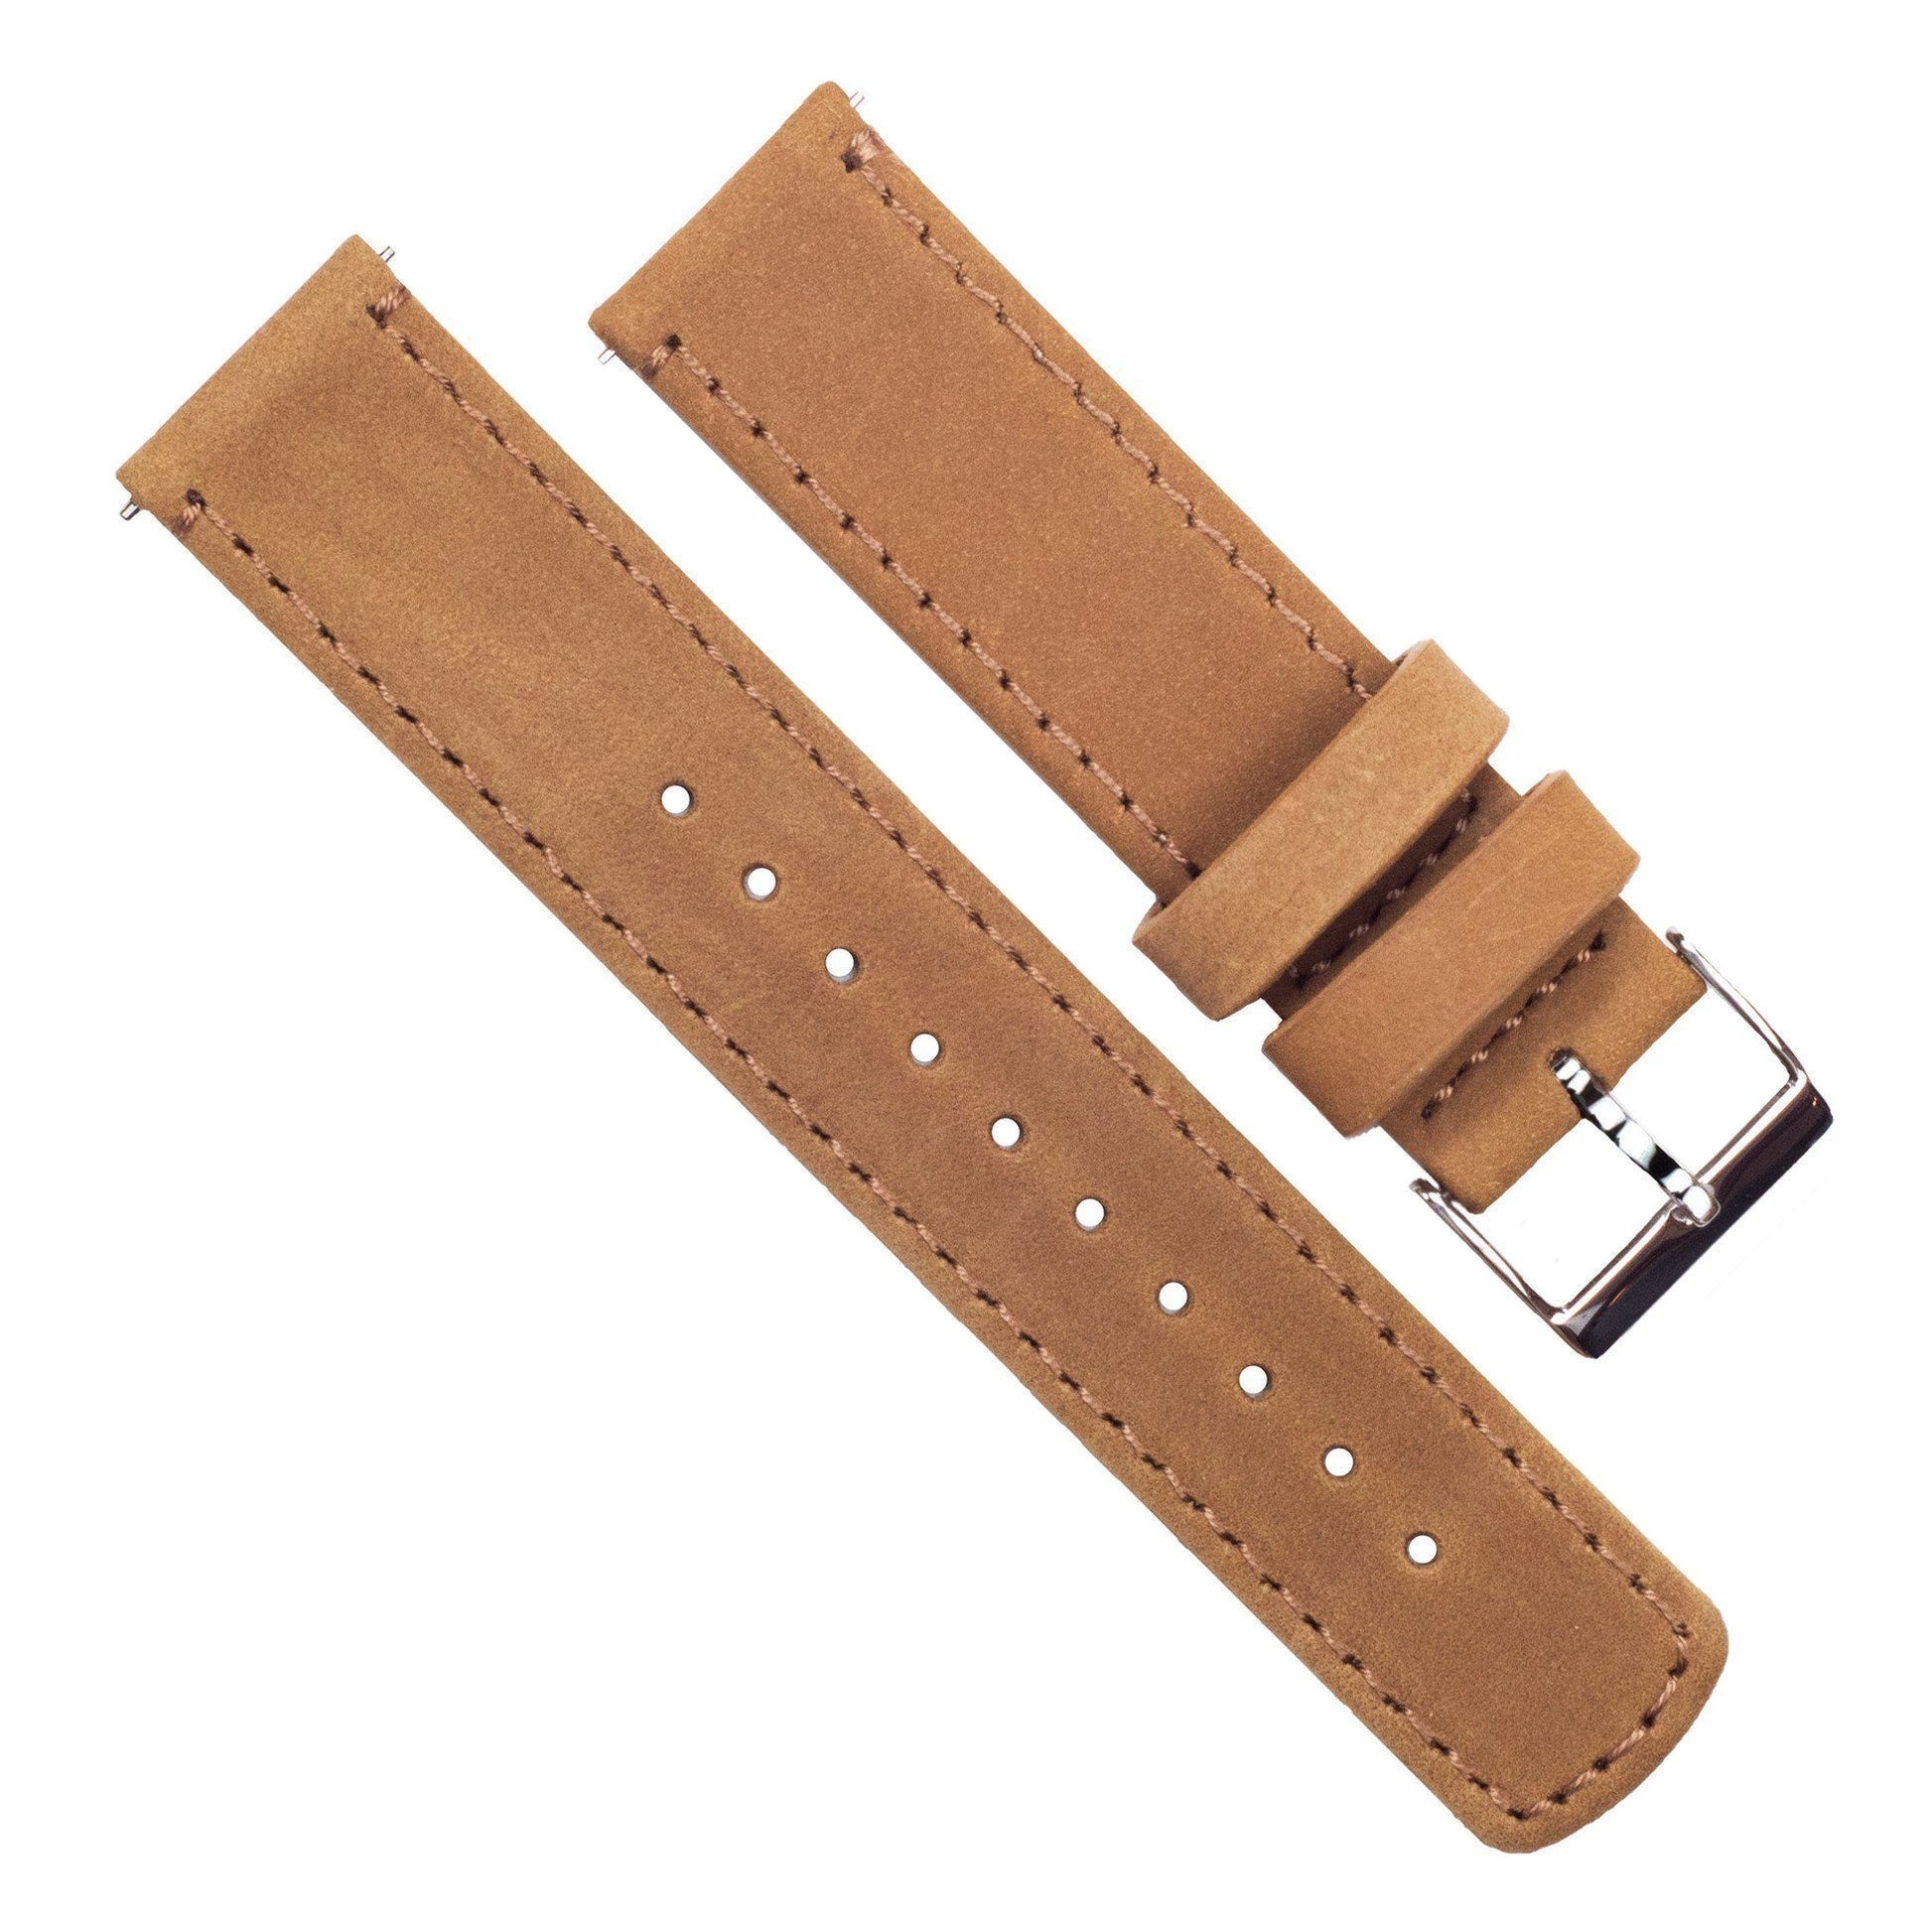 Pebble Smart Watches | Gingerbread Brown Leather & Stitching - Barton Watch Bands